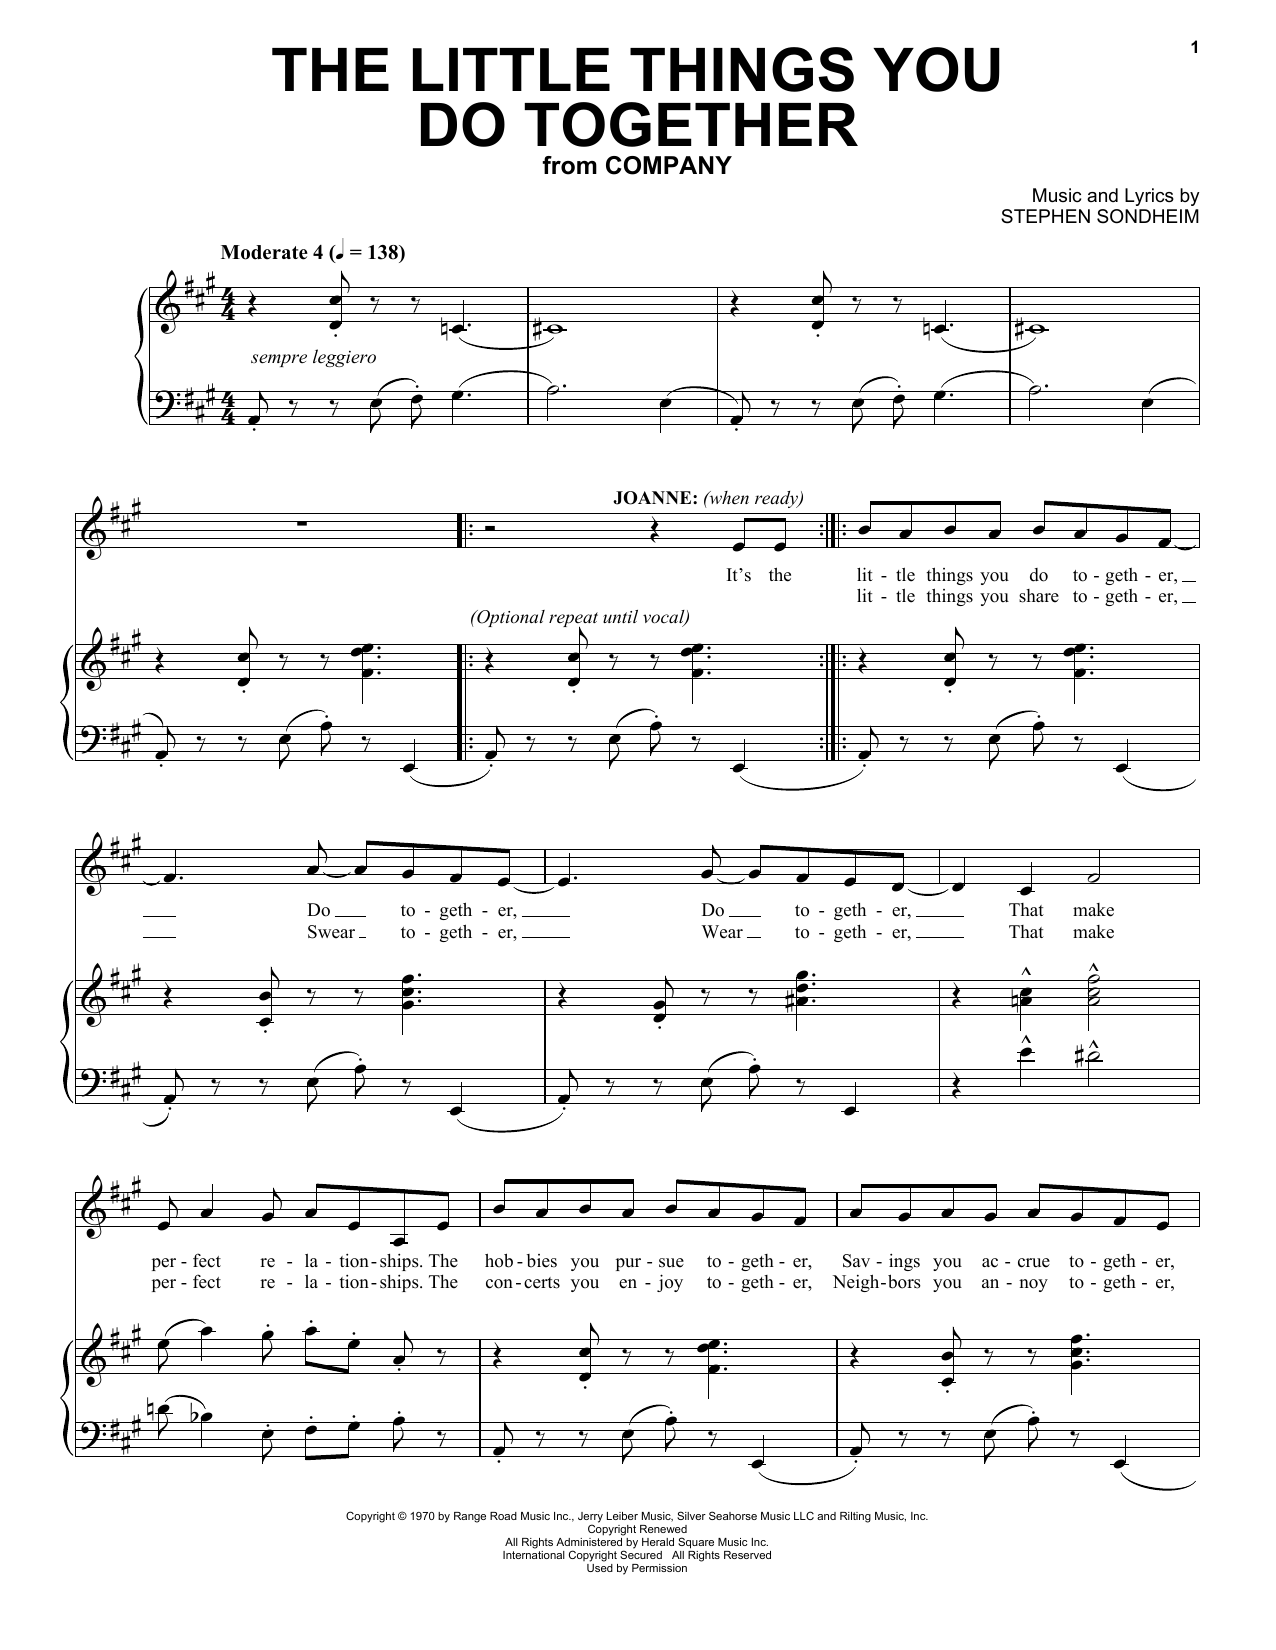 Download Stephen Sondheim The Little Things You Do Together Sheet Music